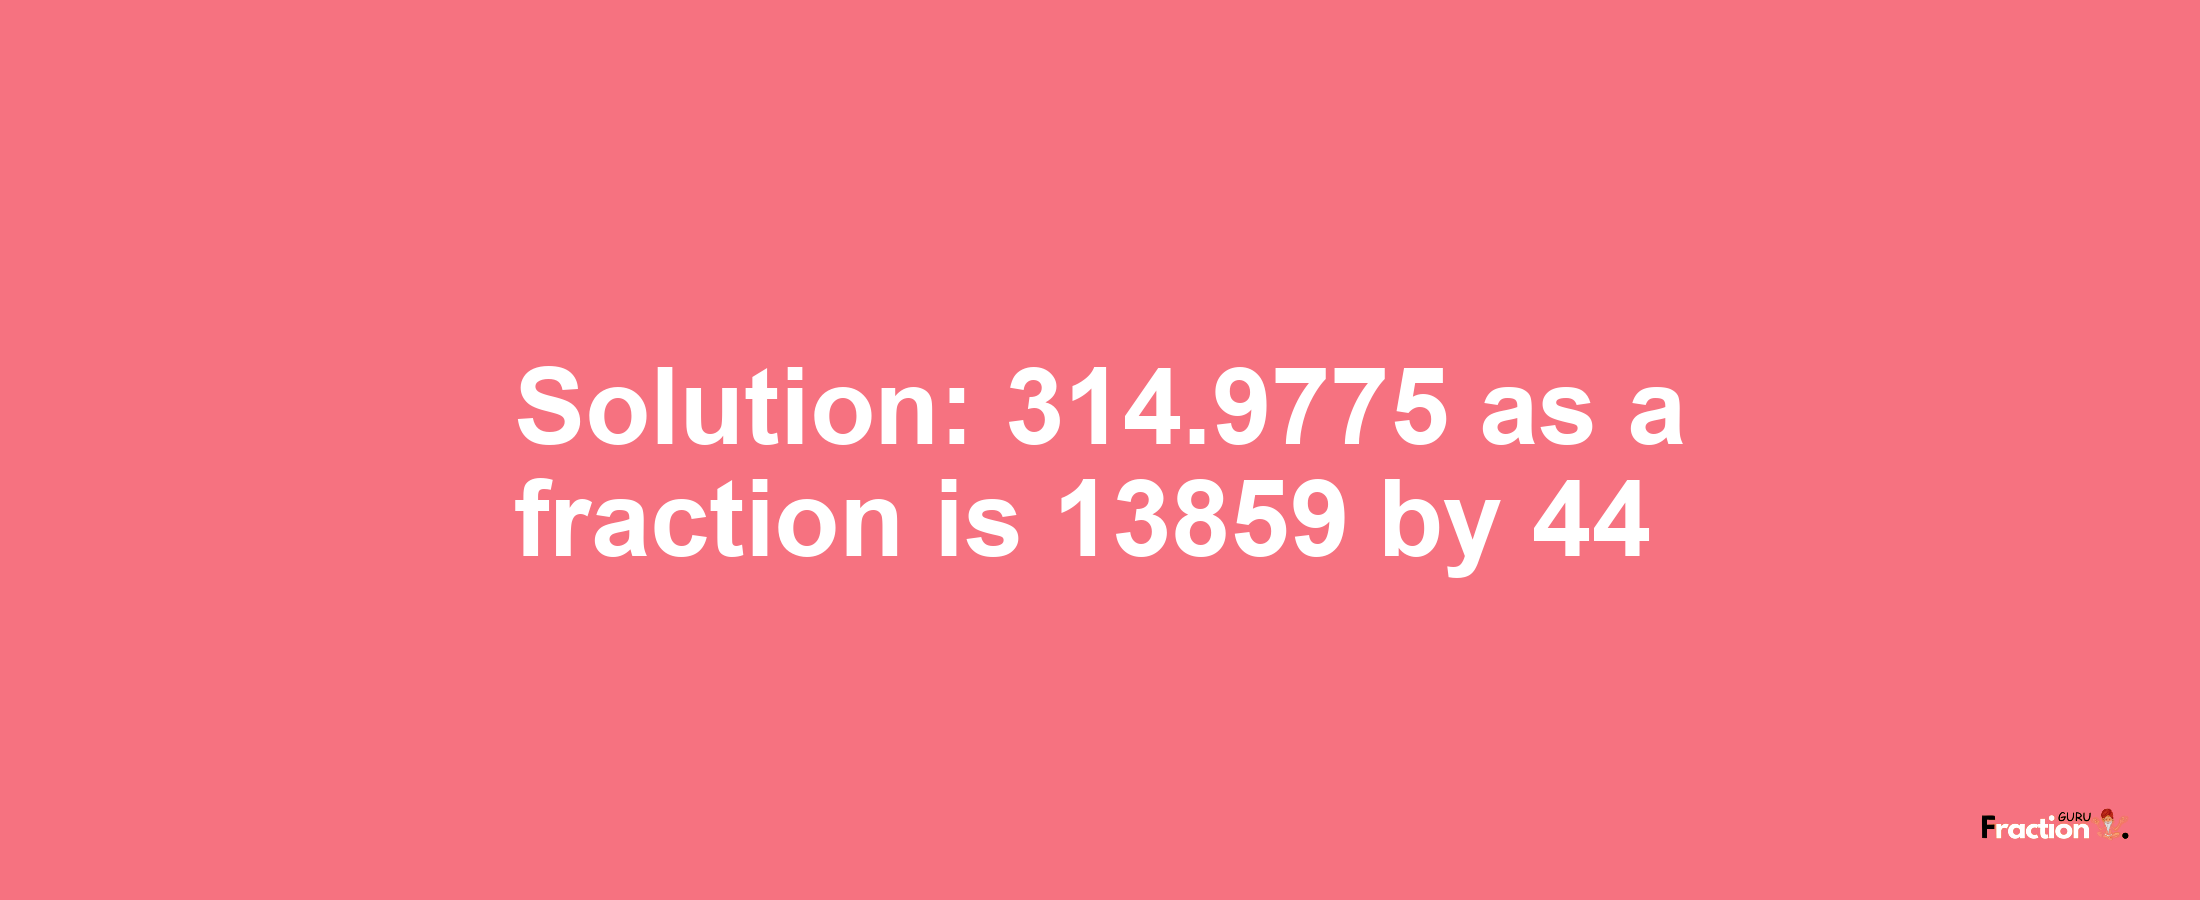 Solution:314.9775 as a fraction is 13859/44